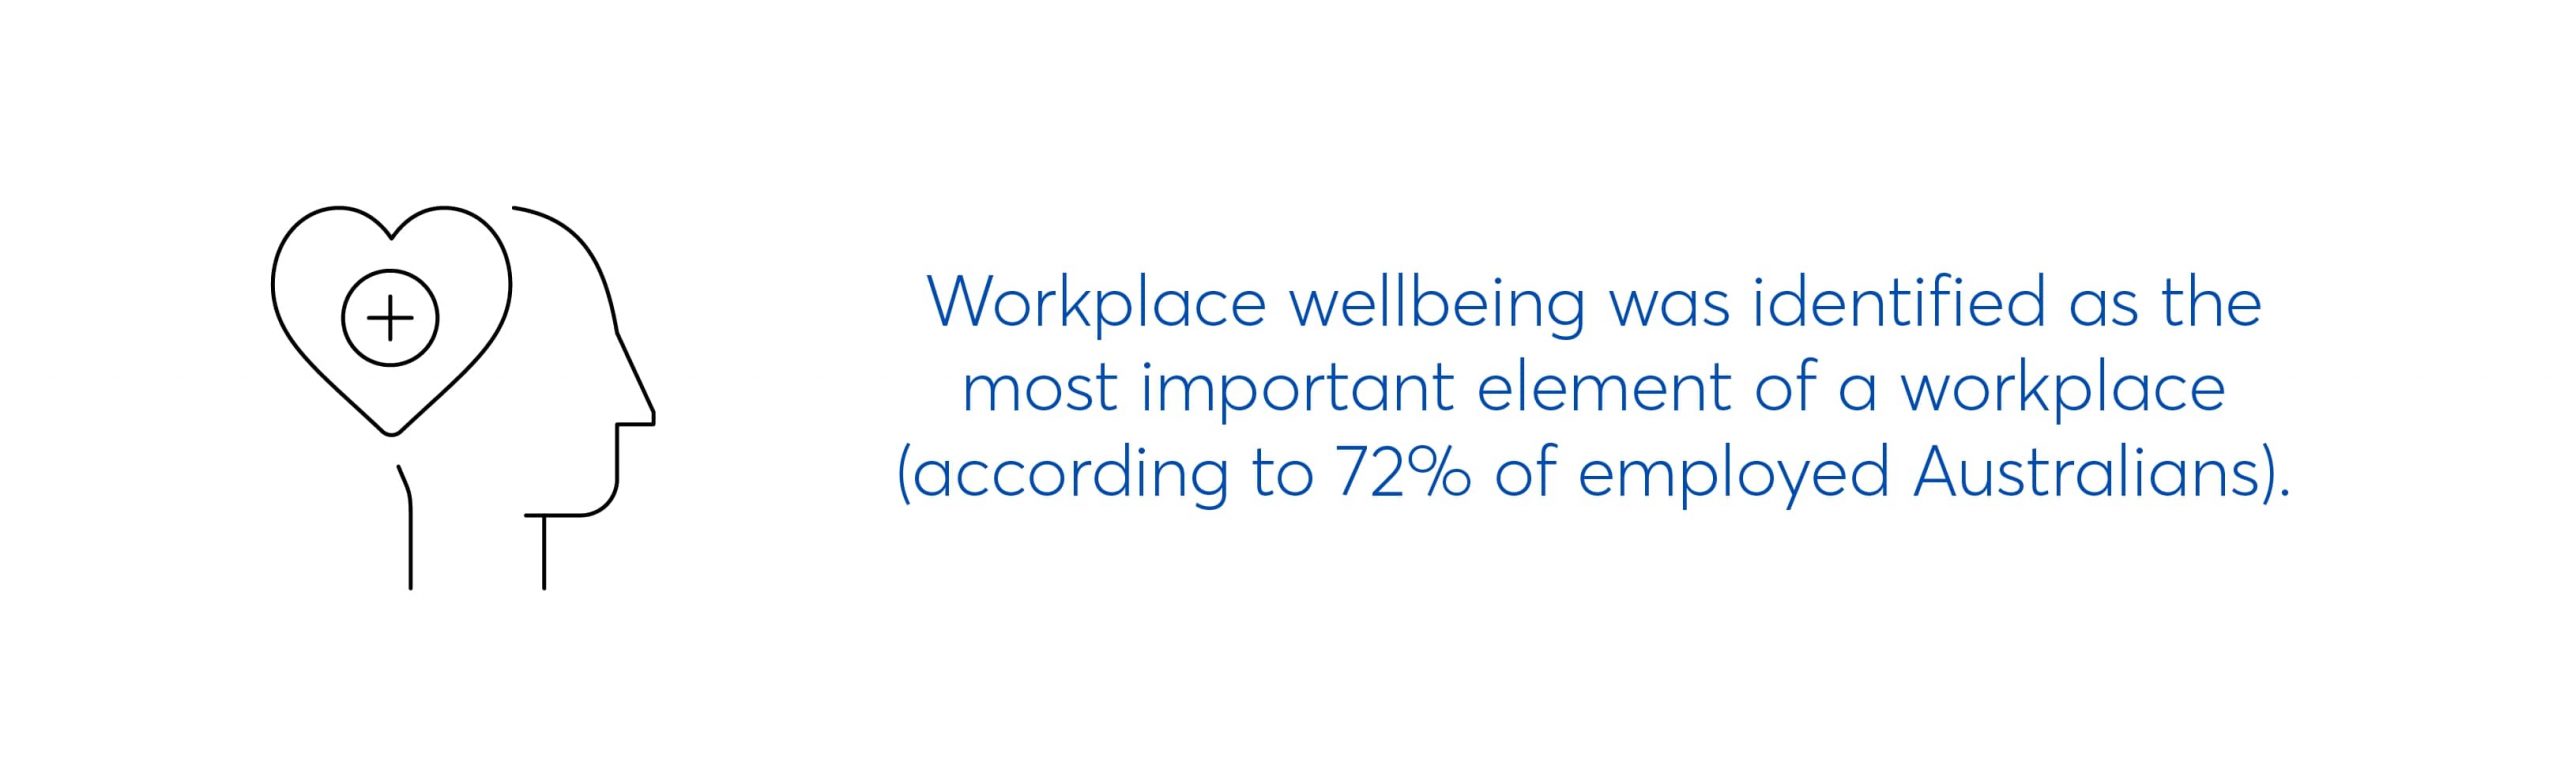 workplace wellbeing was identified as the most important element of a workplace (according to 72% of employed Australians)